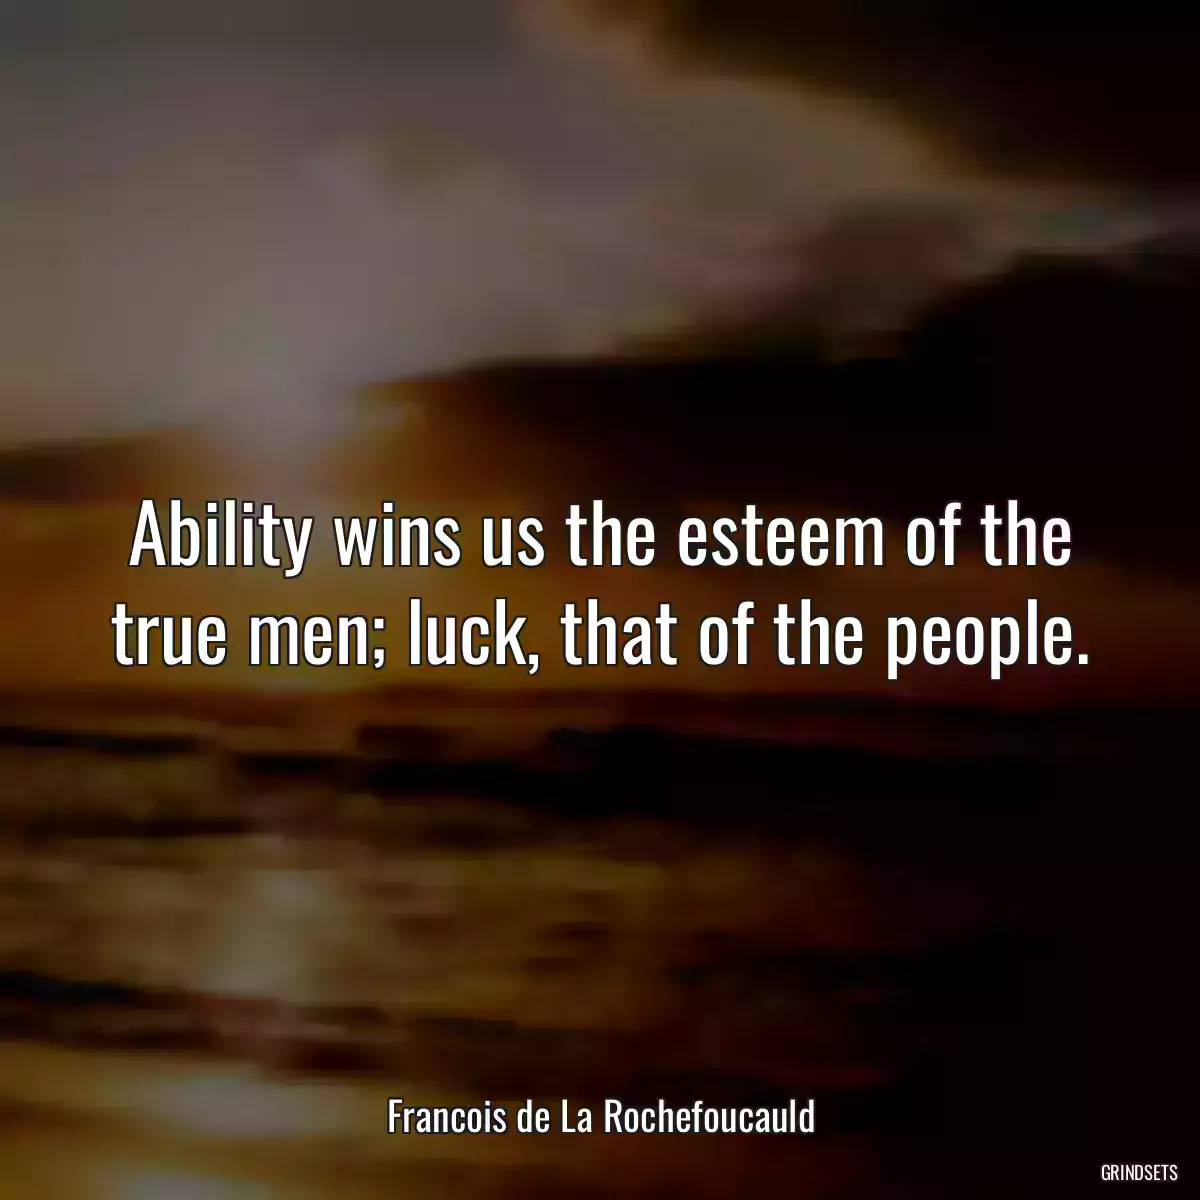 Ability wins us the esteem of the true men; luck, that of the people.